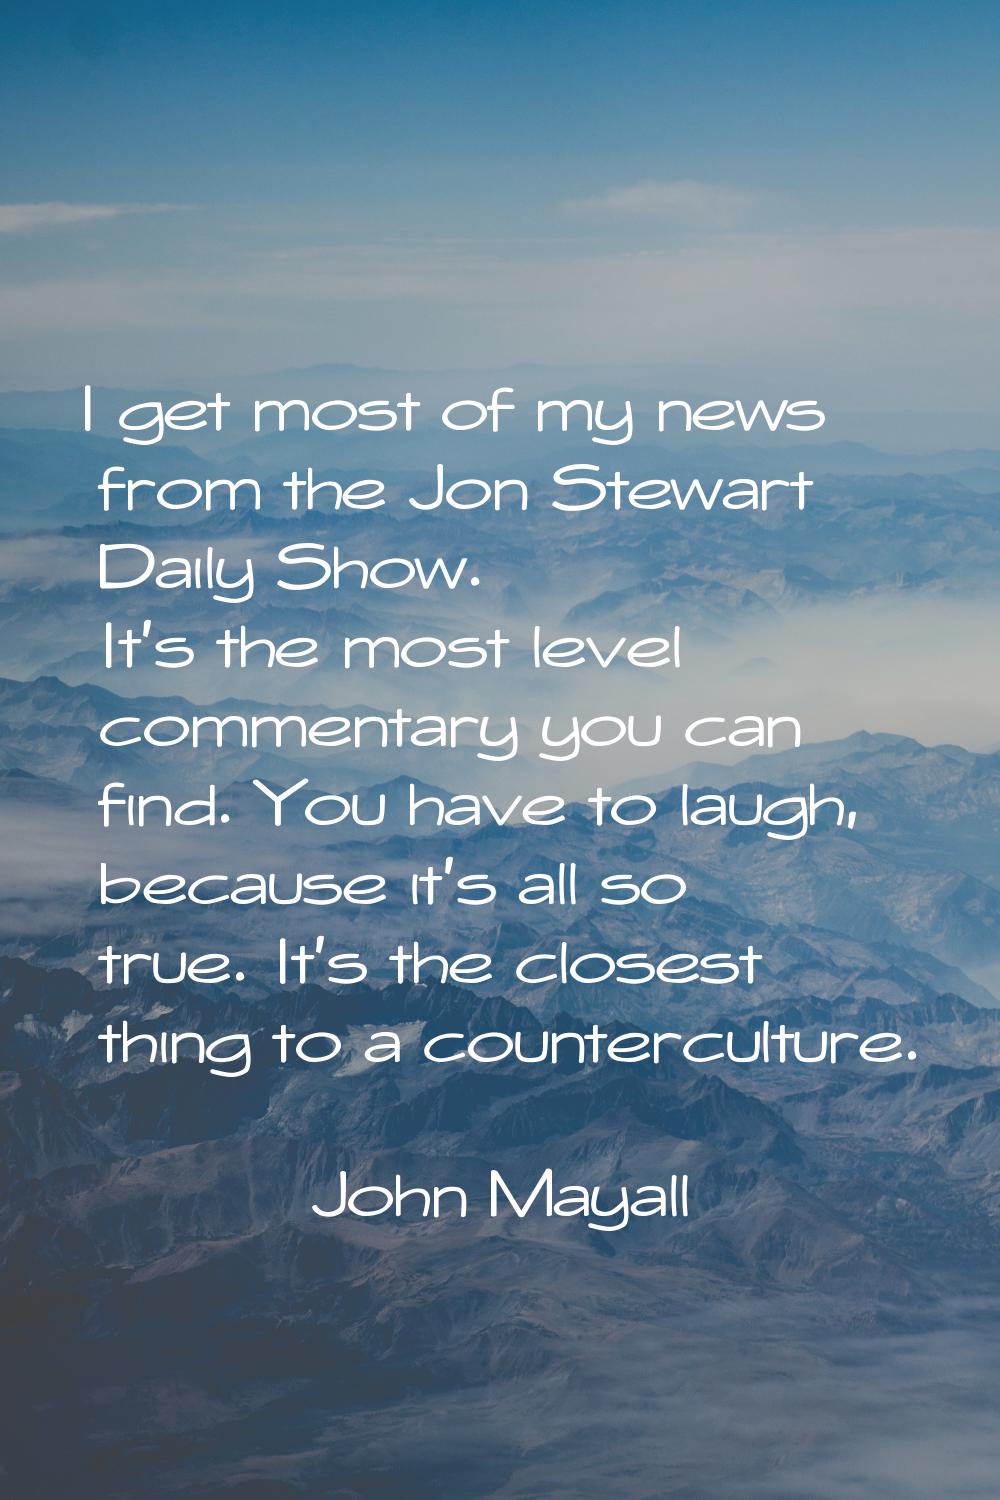 I get most of my news from the Jon Stewart Daily Show. It's the most level commentary you can find.